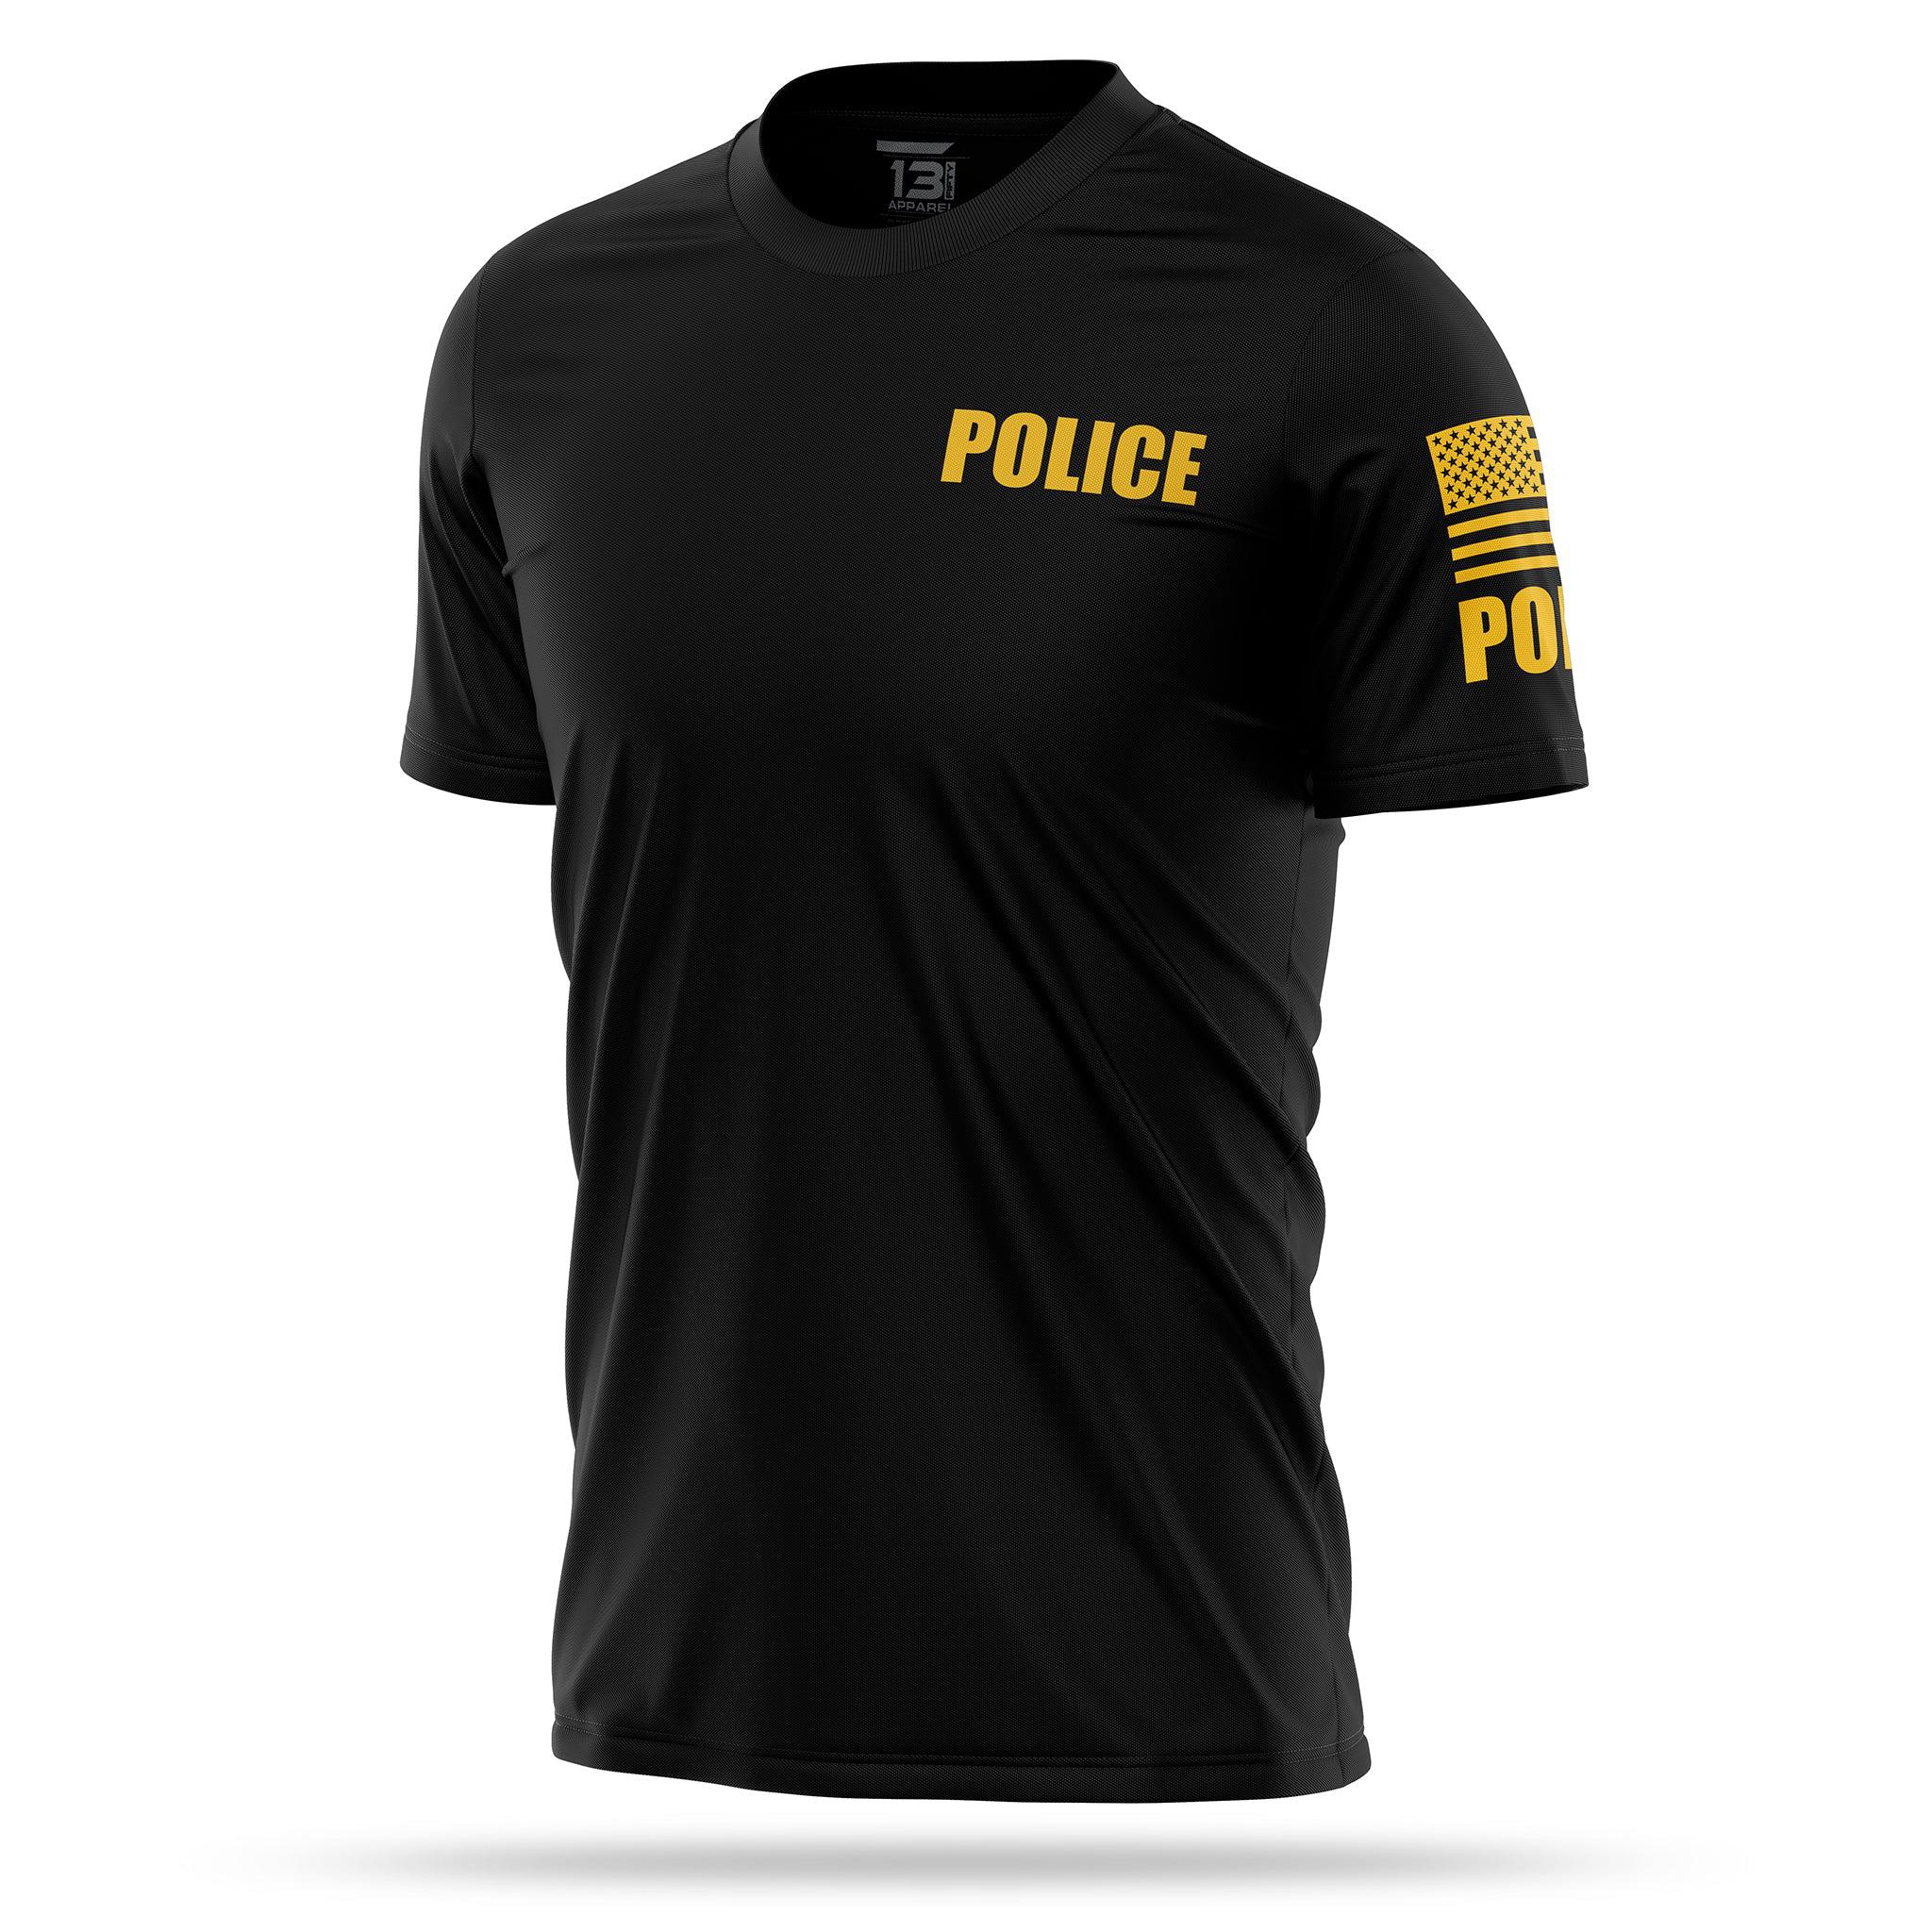 Law Enforcement & First Responder Apparel | 13 Fifty Apparel